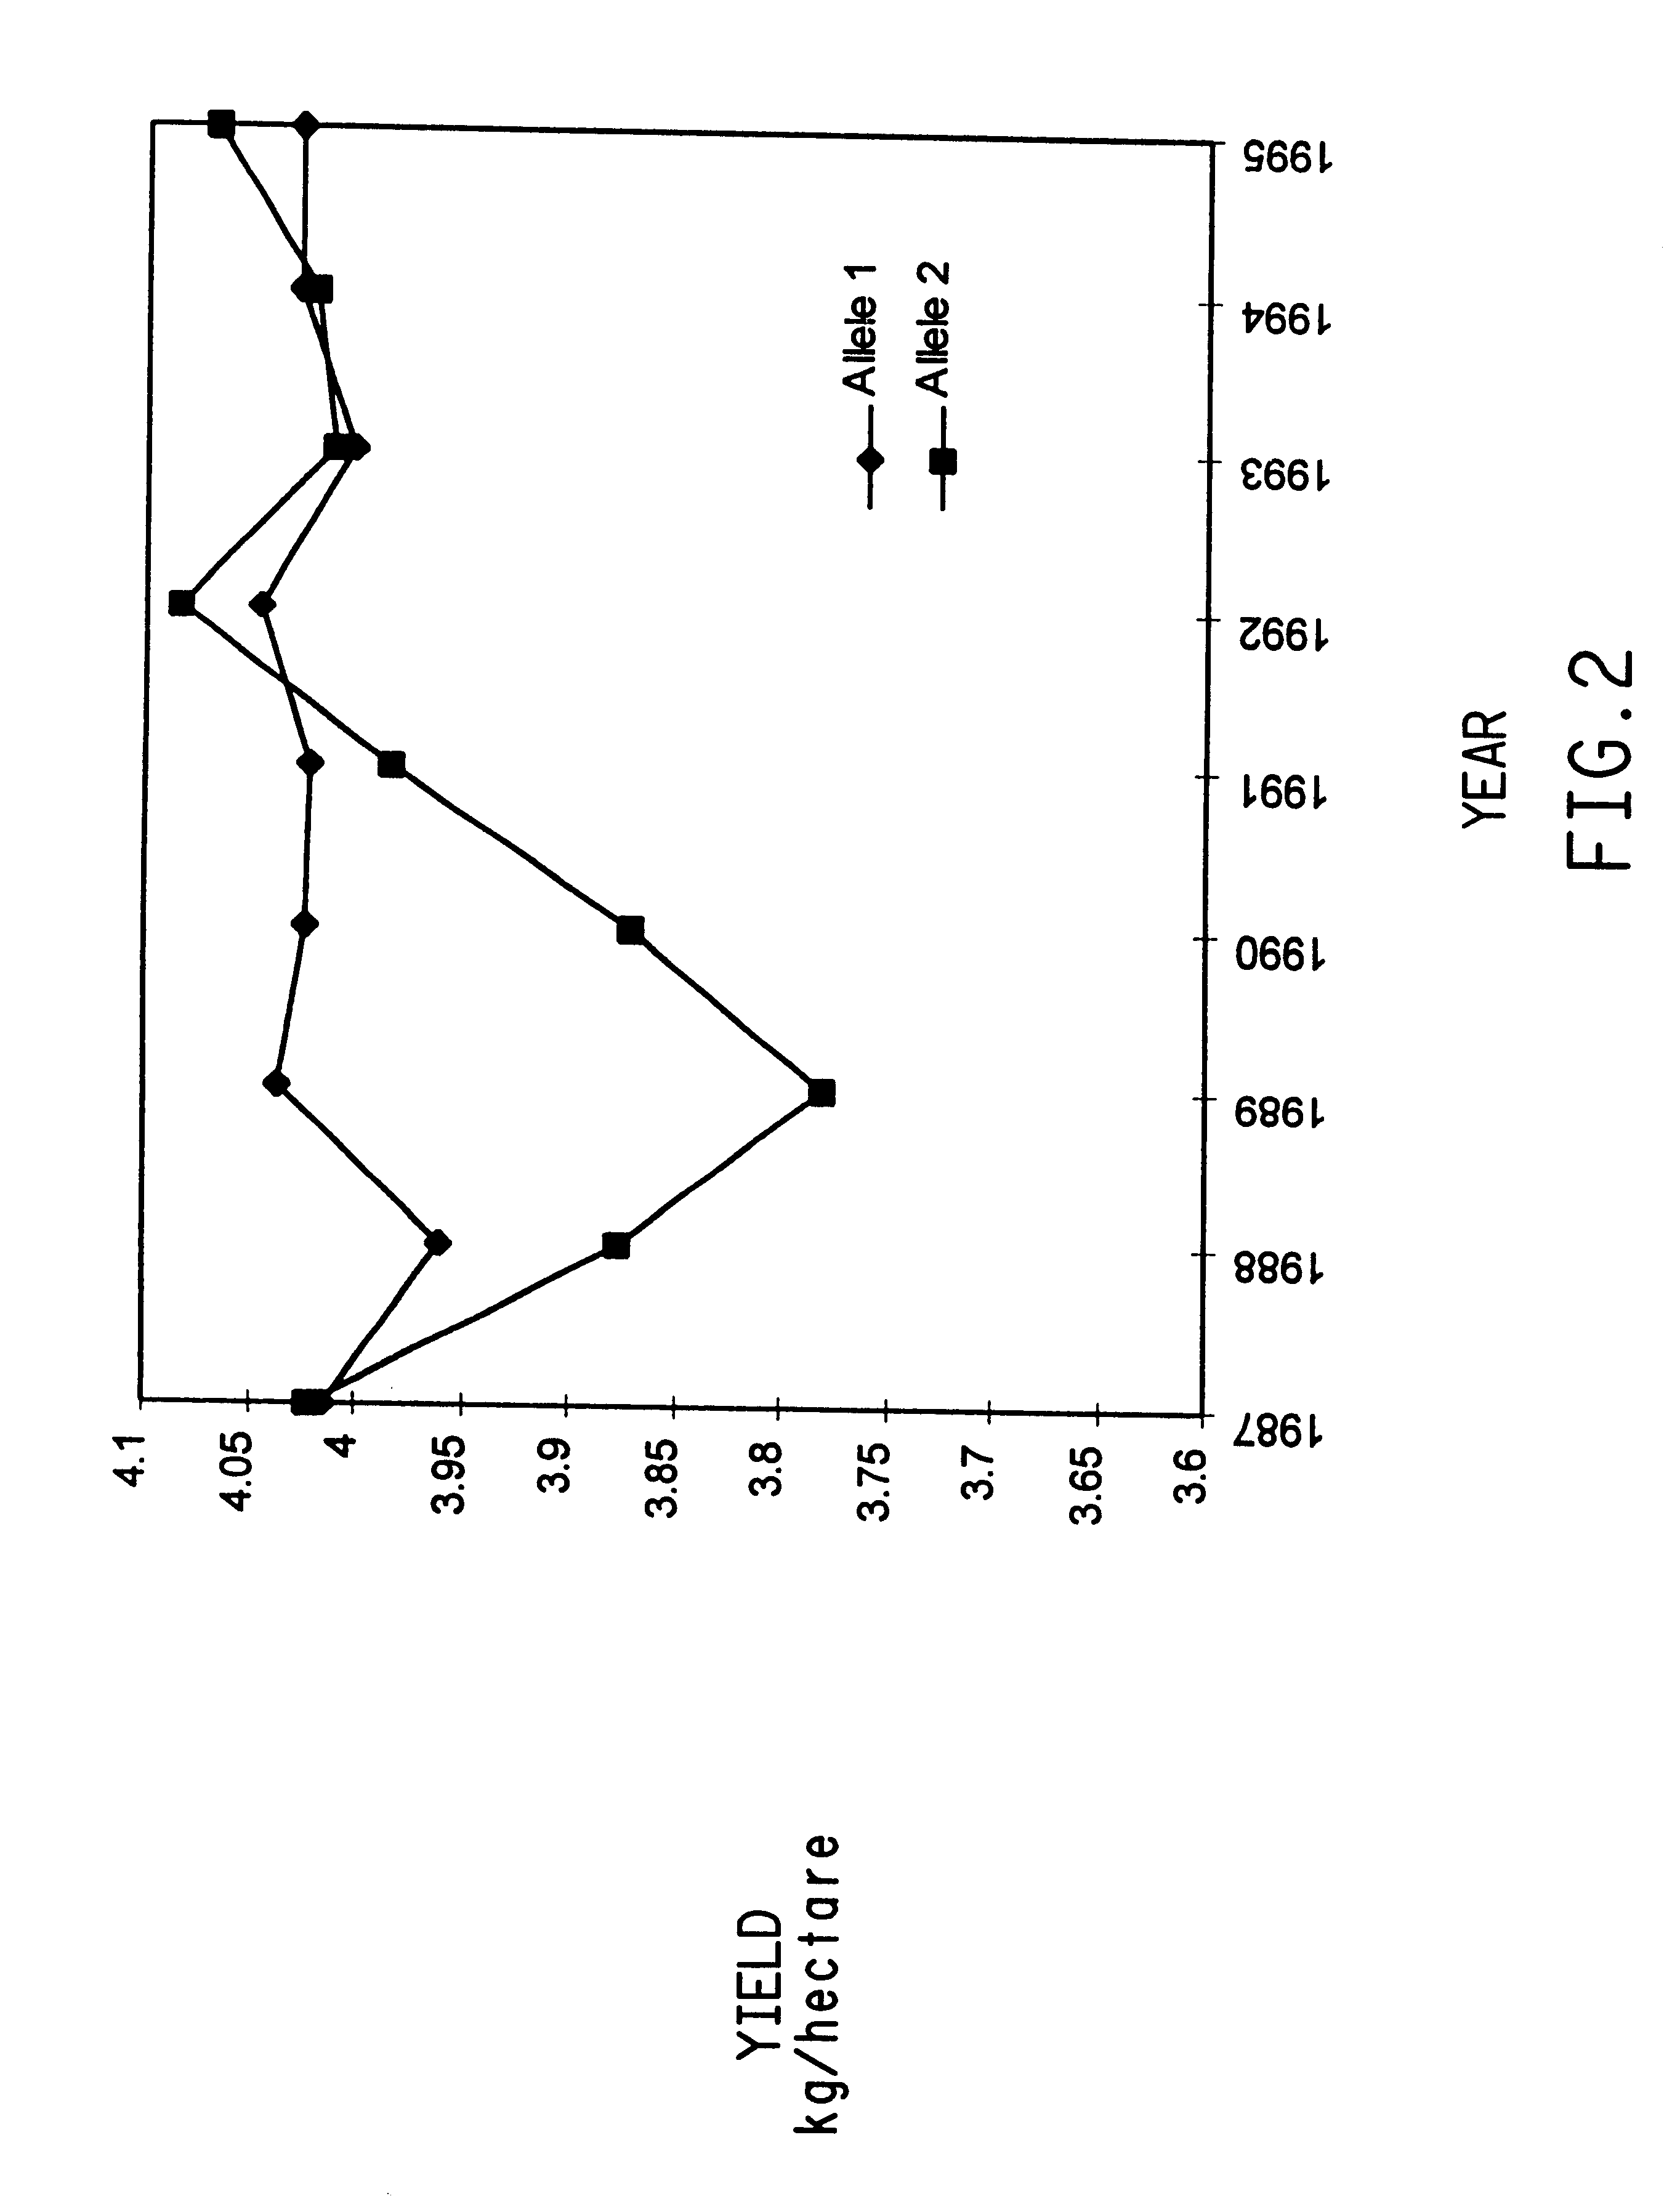 Method for identifying genetic marker loci associated with trait loci